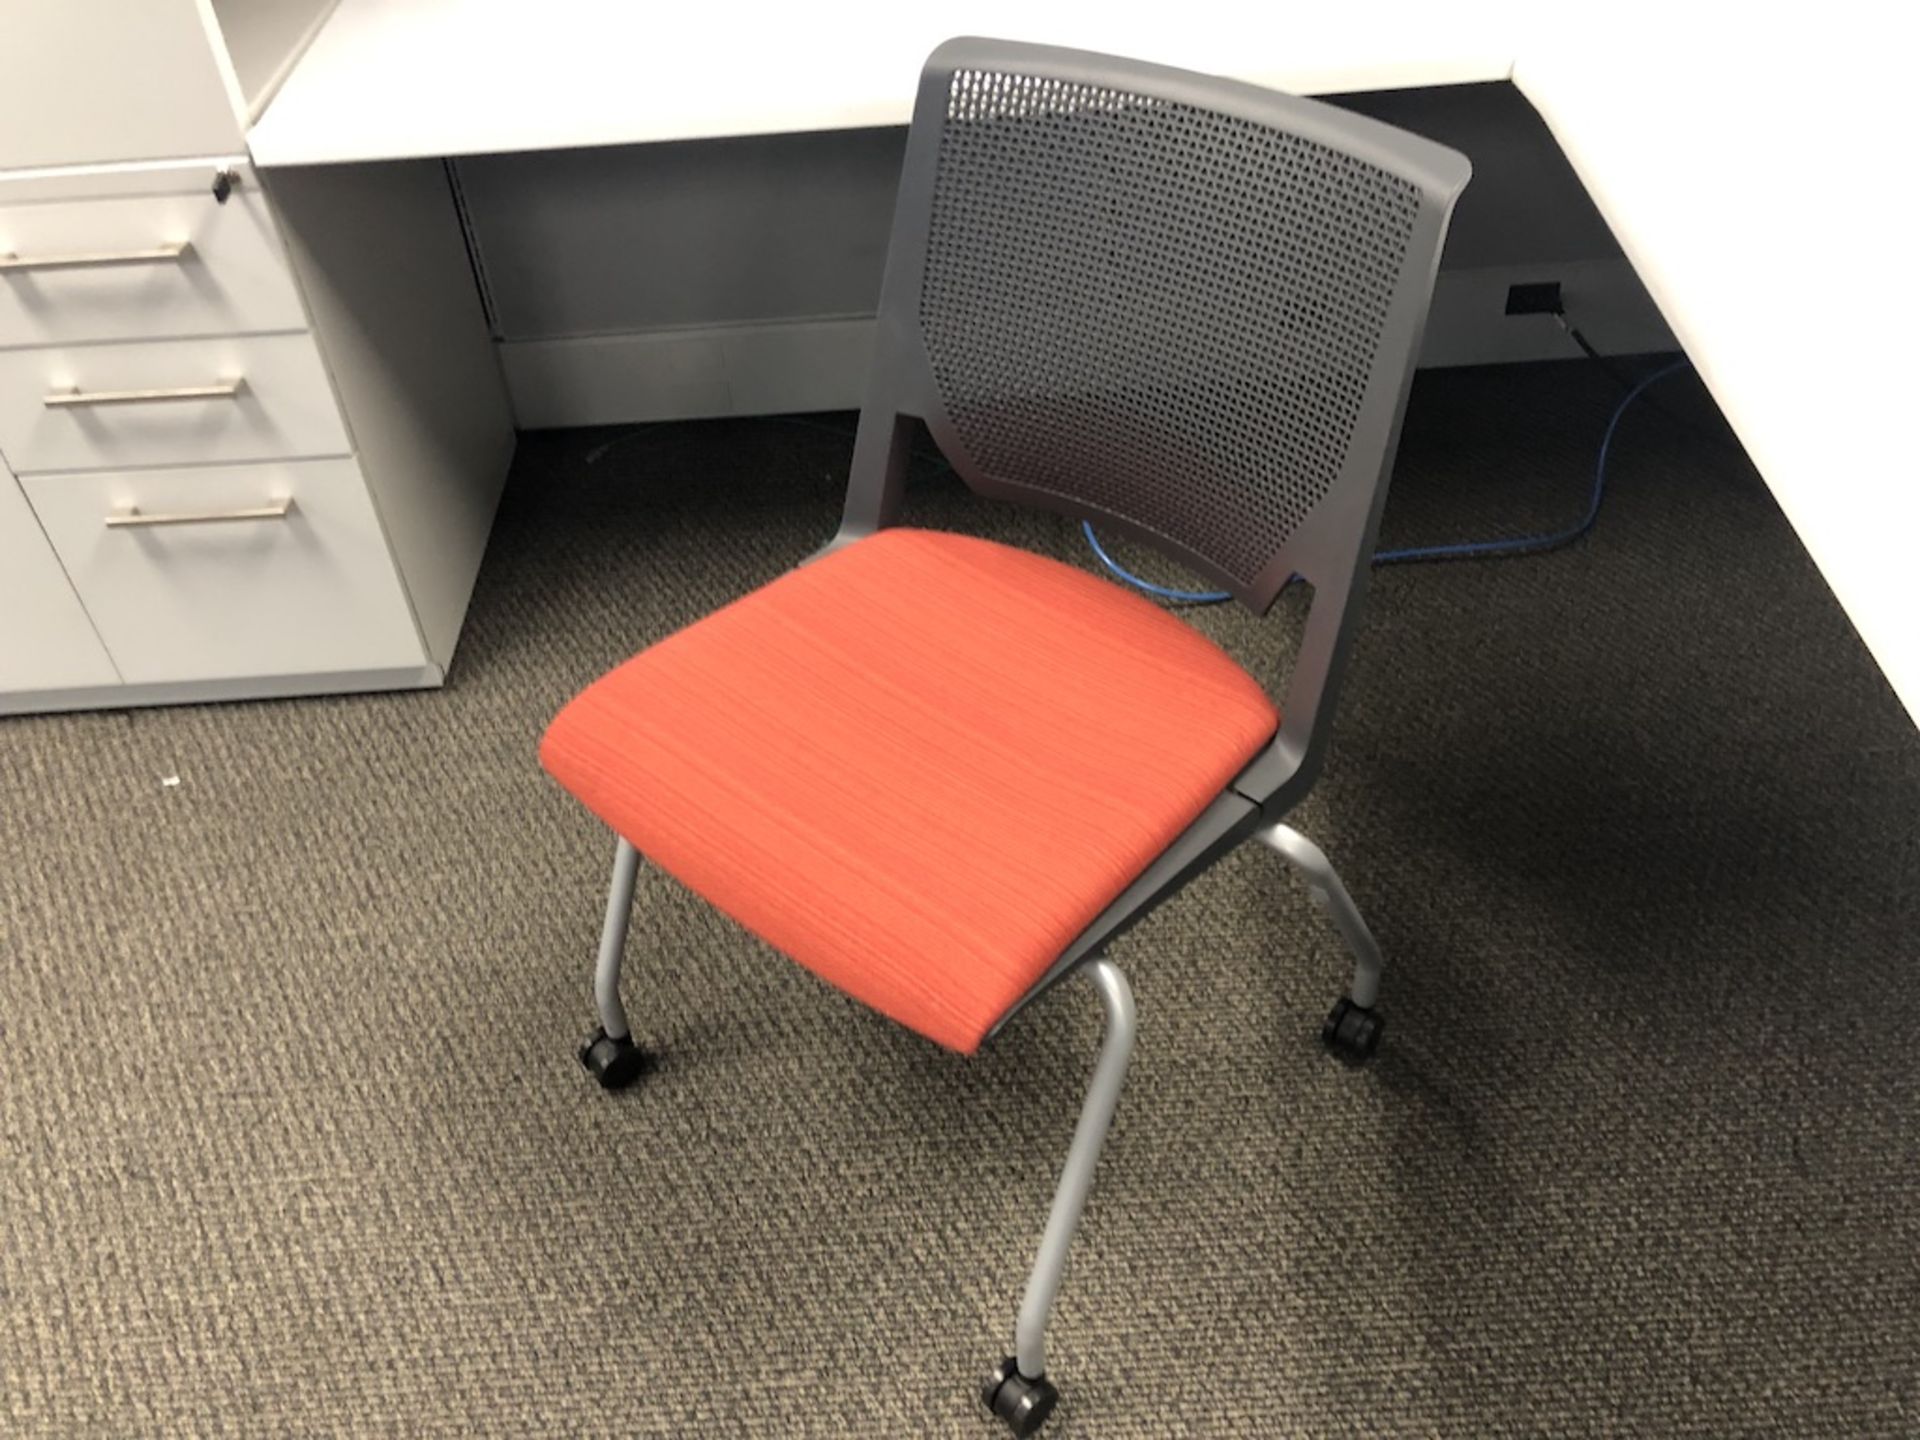 4 CASTER OFFICE CHAIR RED SEATING PAD   SCHNEIDER ELECTRIC- 6611 PRESTON AVE SUITE A - Image 3 of 3